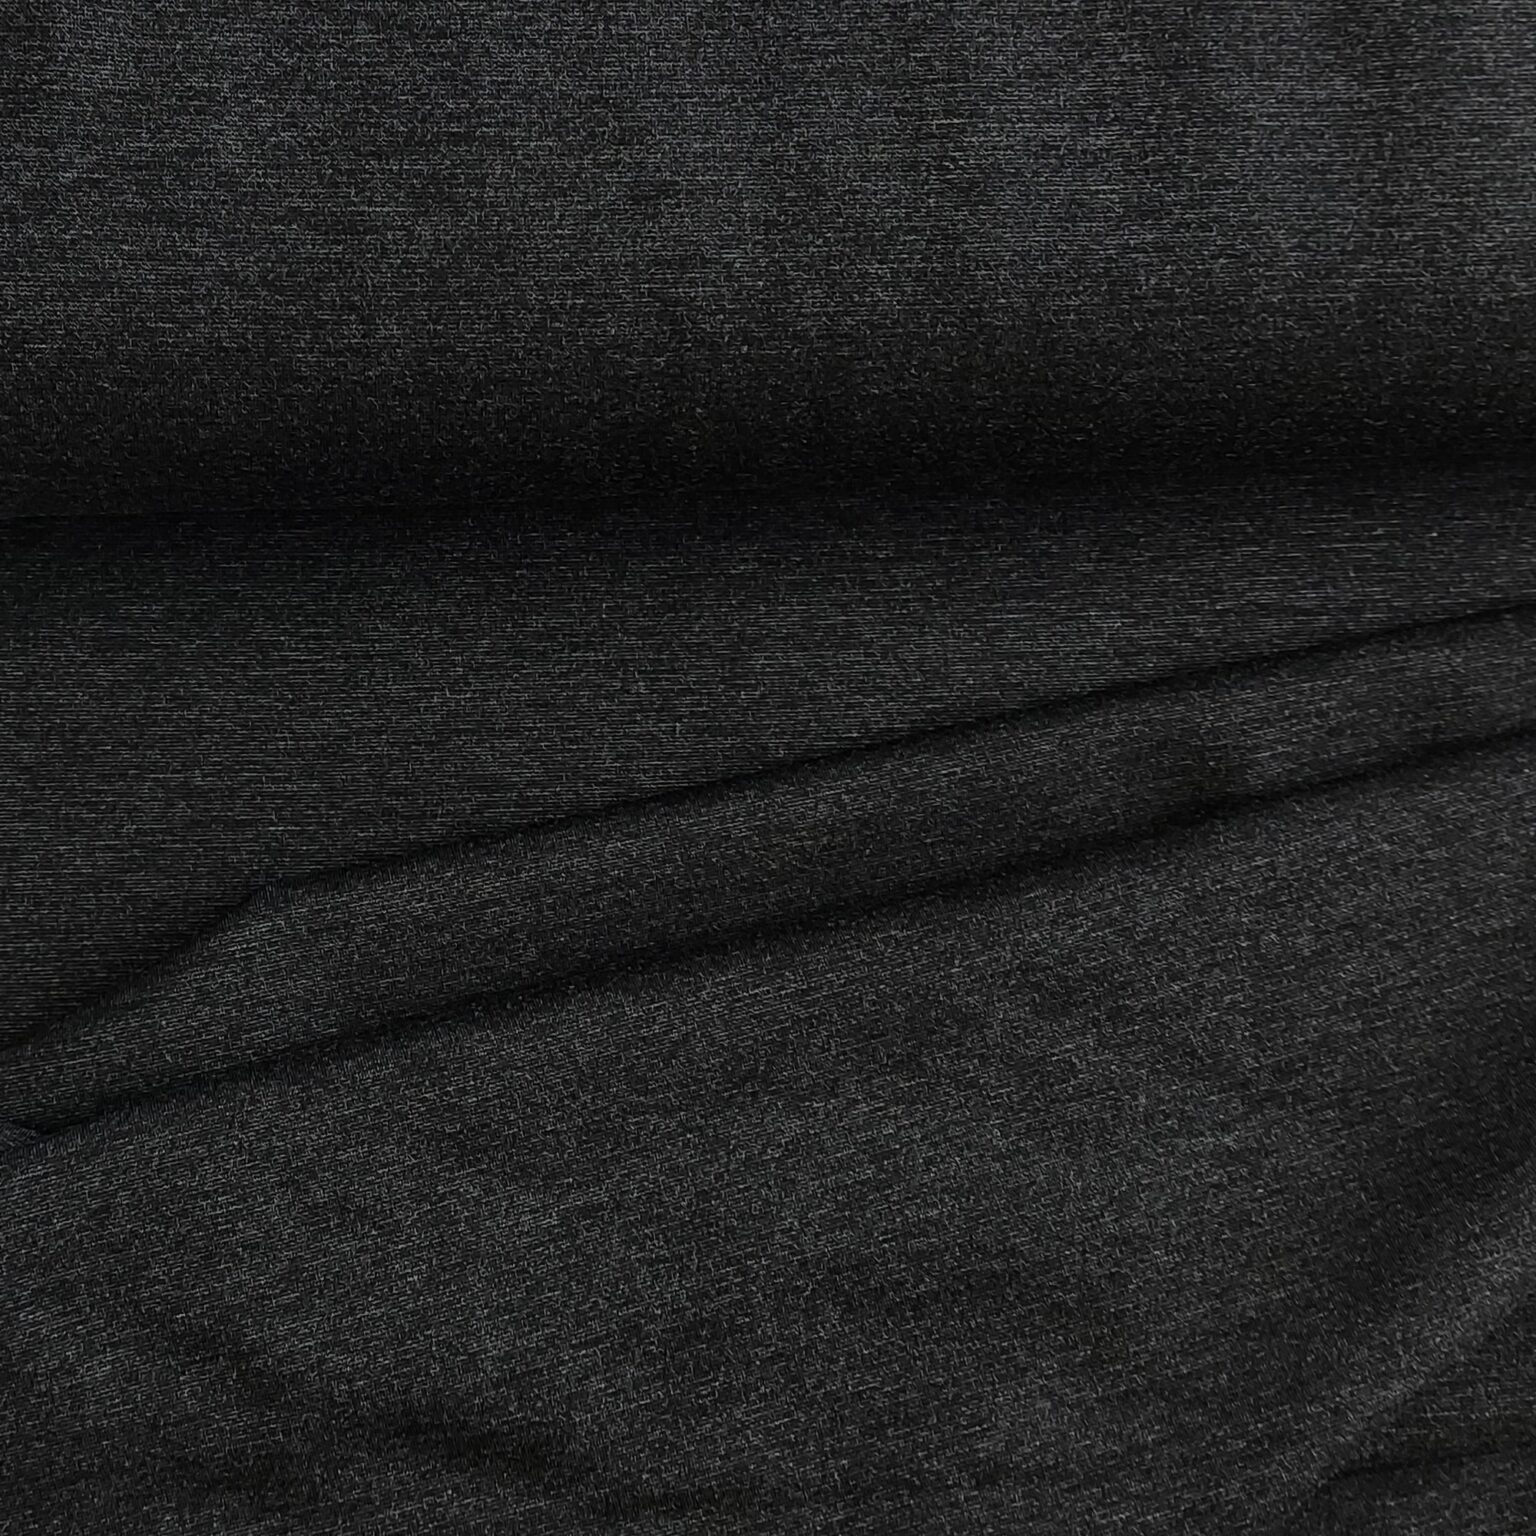 Charcoal Grey Ponteroma Jersey Fabric | More Sewing